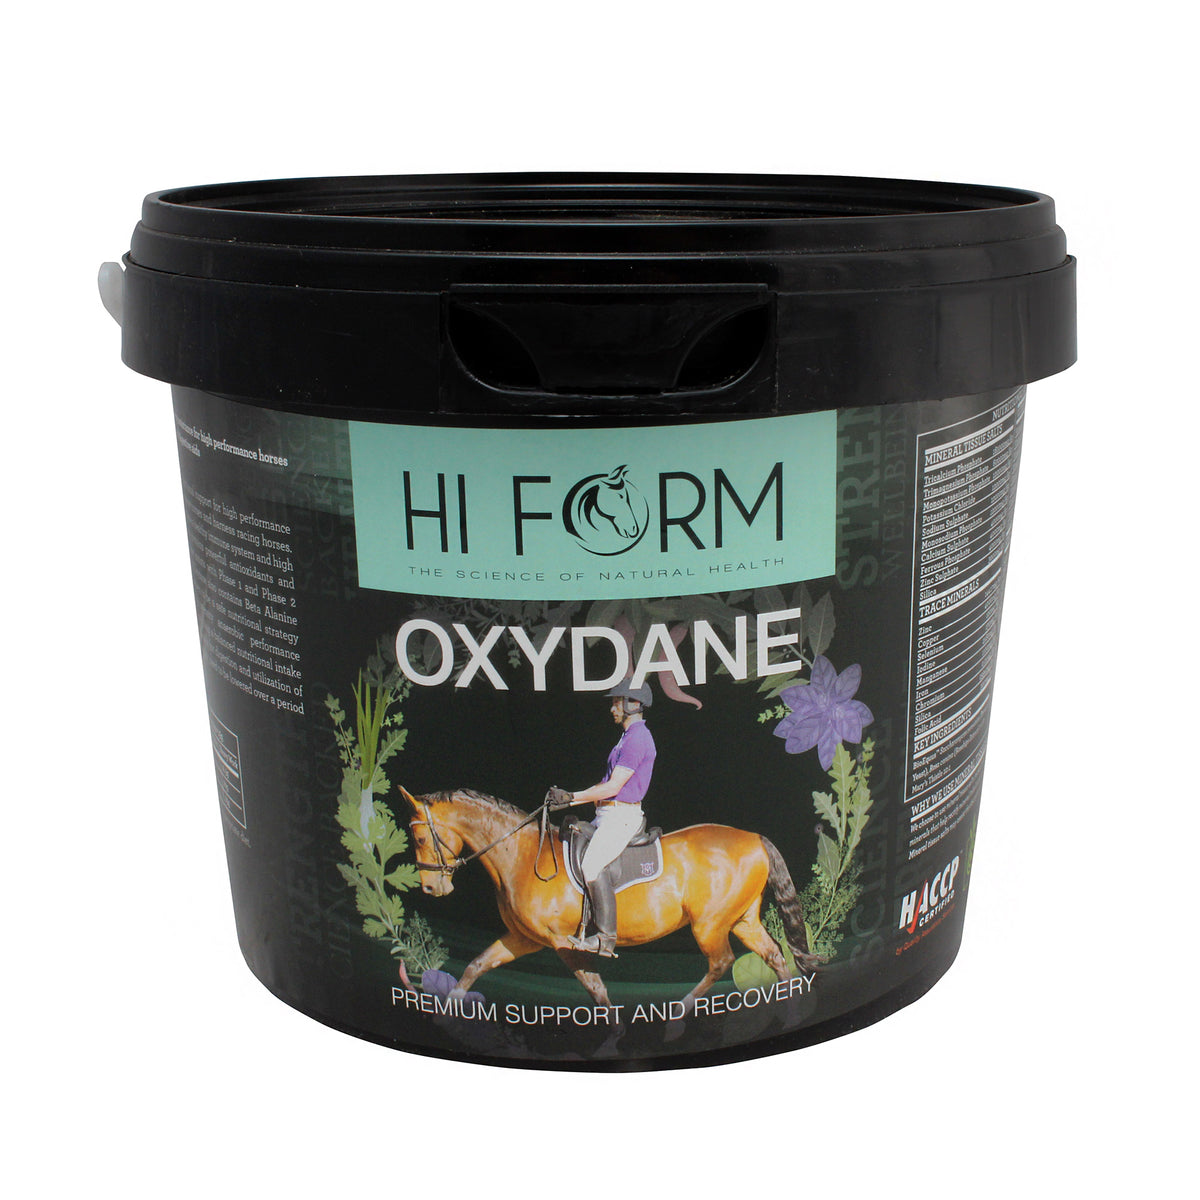 Hi Form OxyDane Premium Support &amp; Recovery for Horses